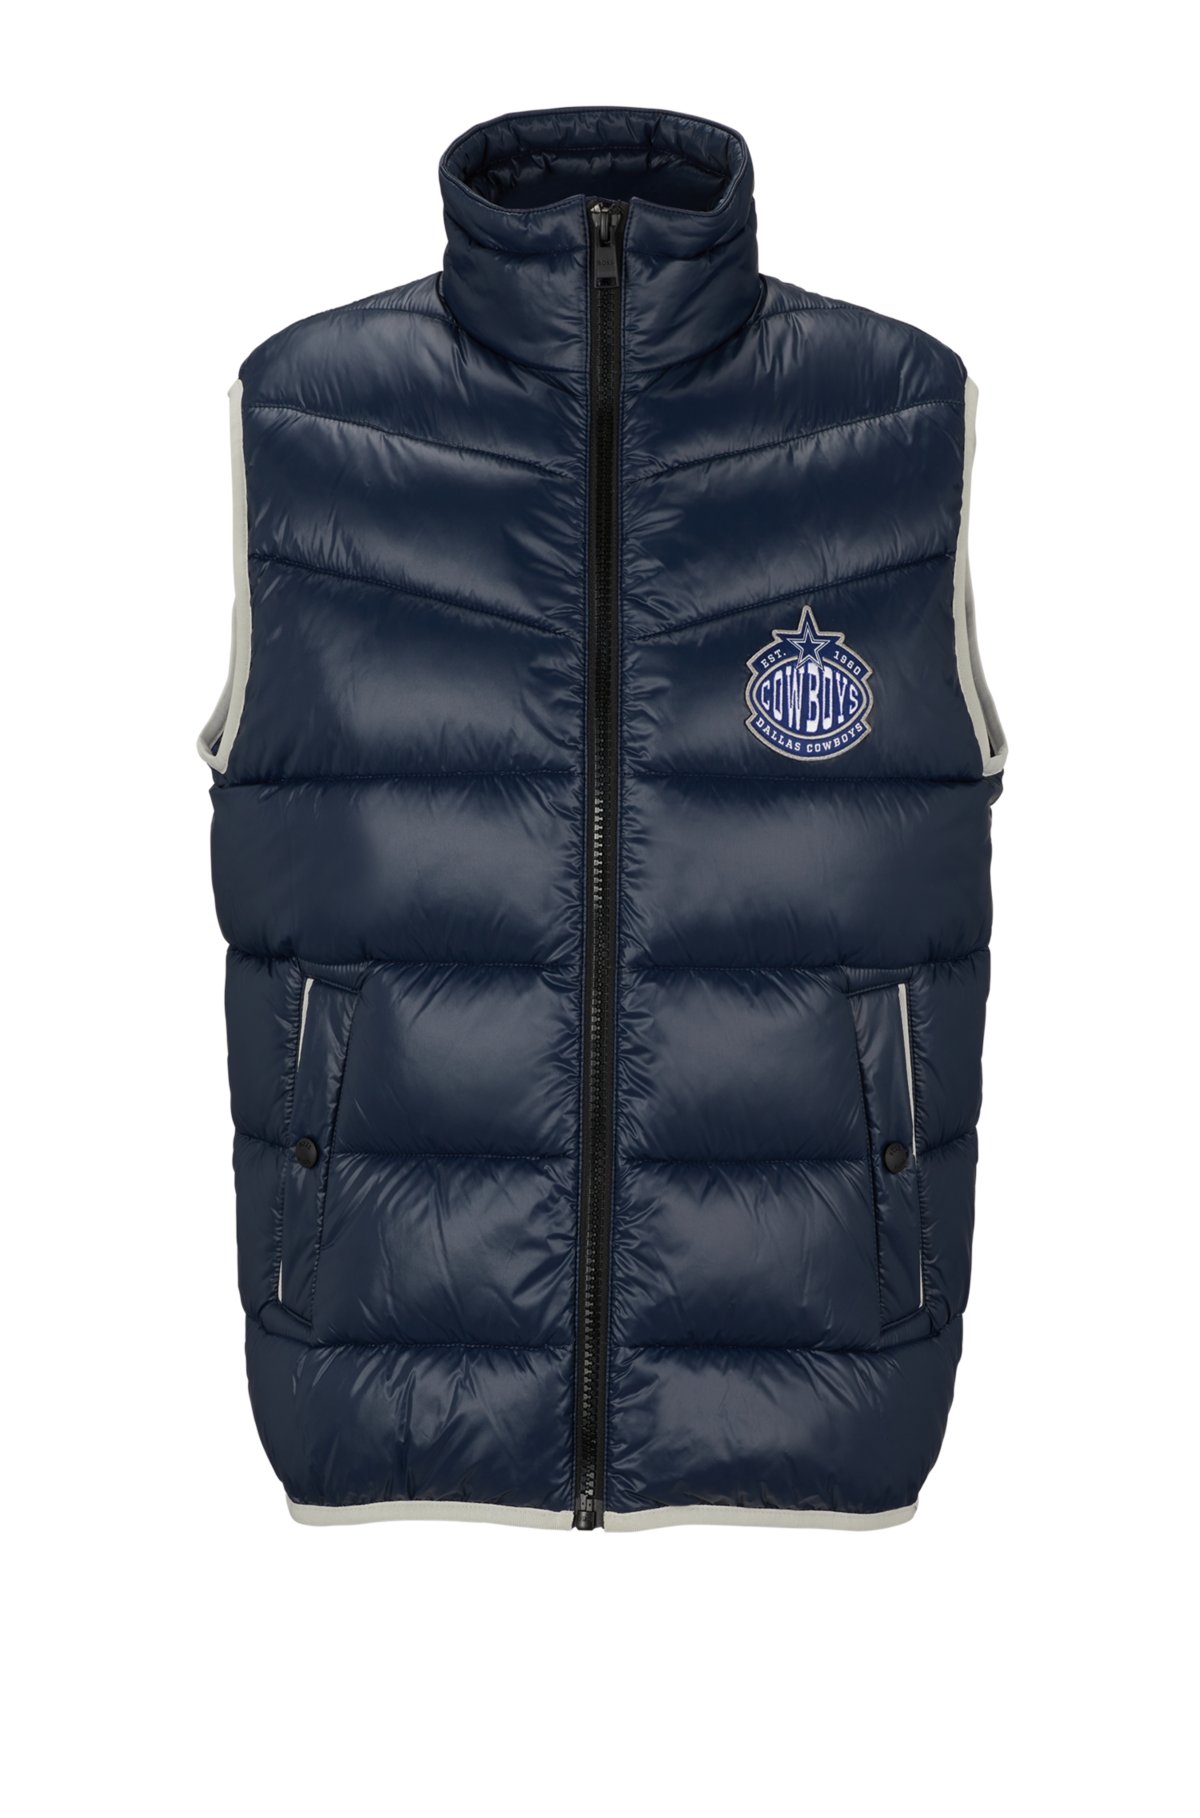  BOSS x NFL water-repellent padded gilet with collaborative branding, Cowboys